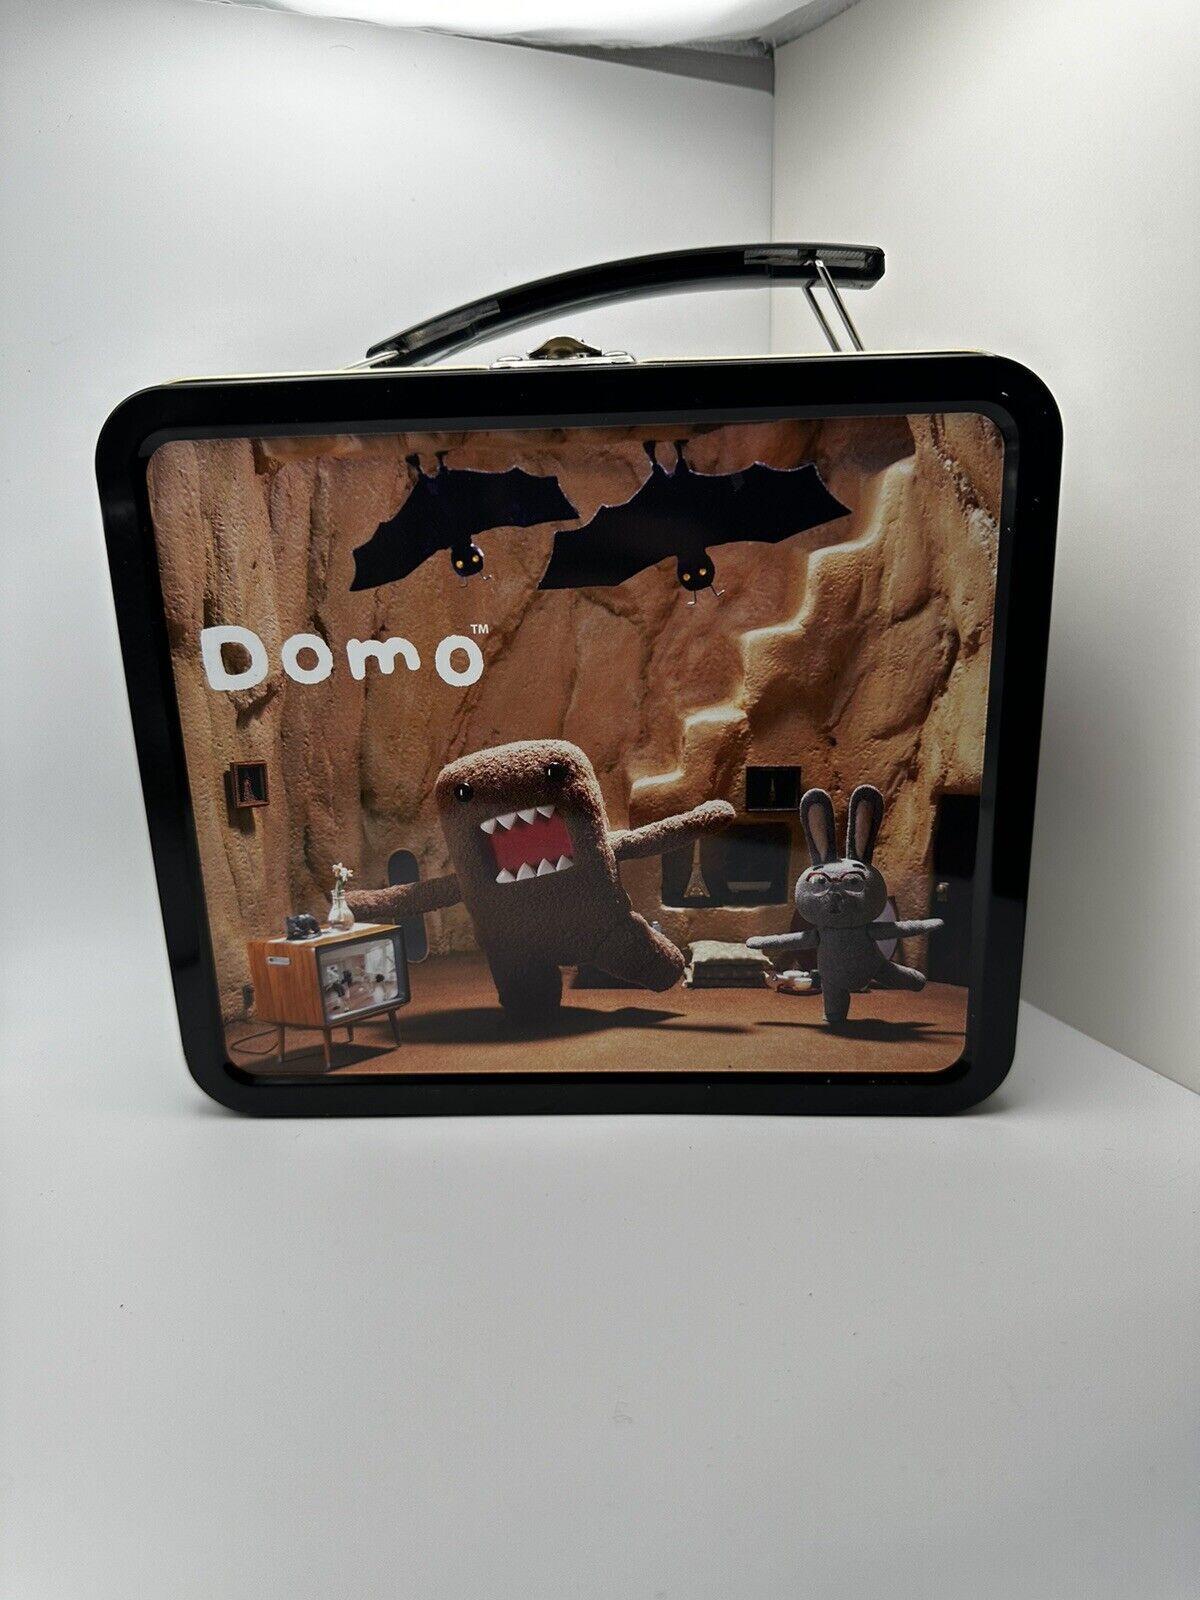 Domo Metal Lunch Box By Darkhorse and Domonation Rare Collectors Item